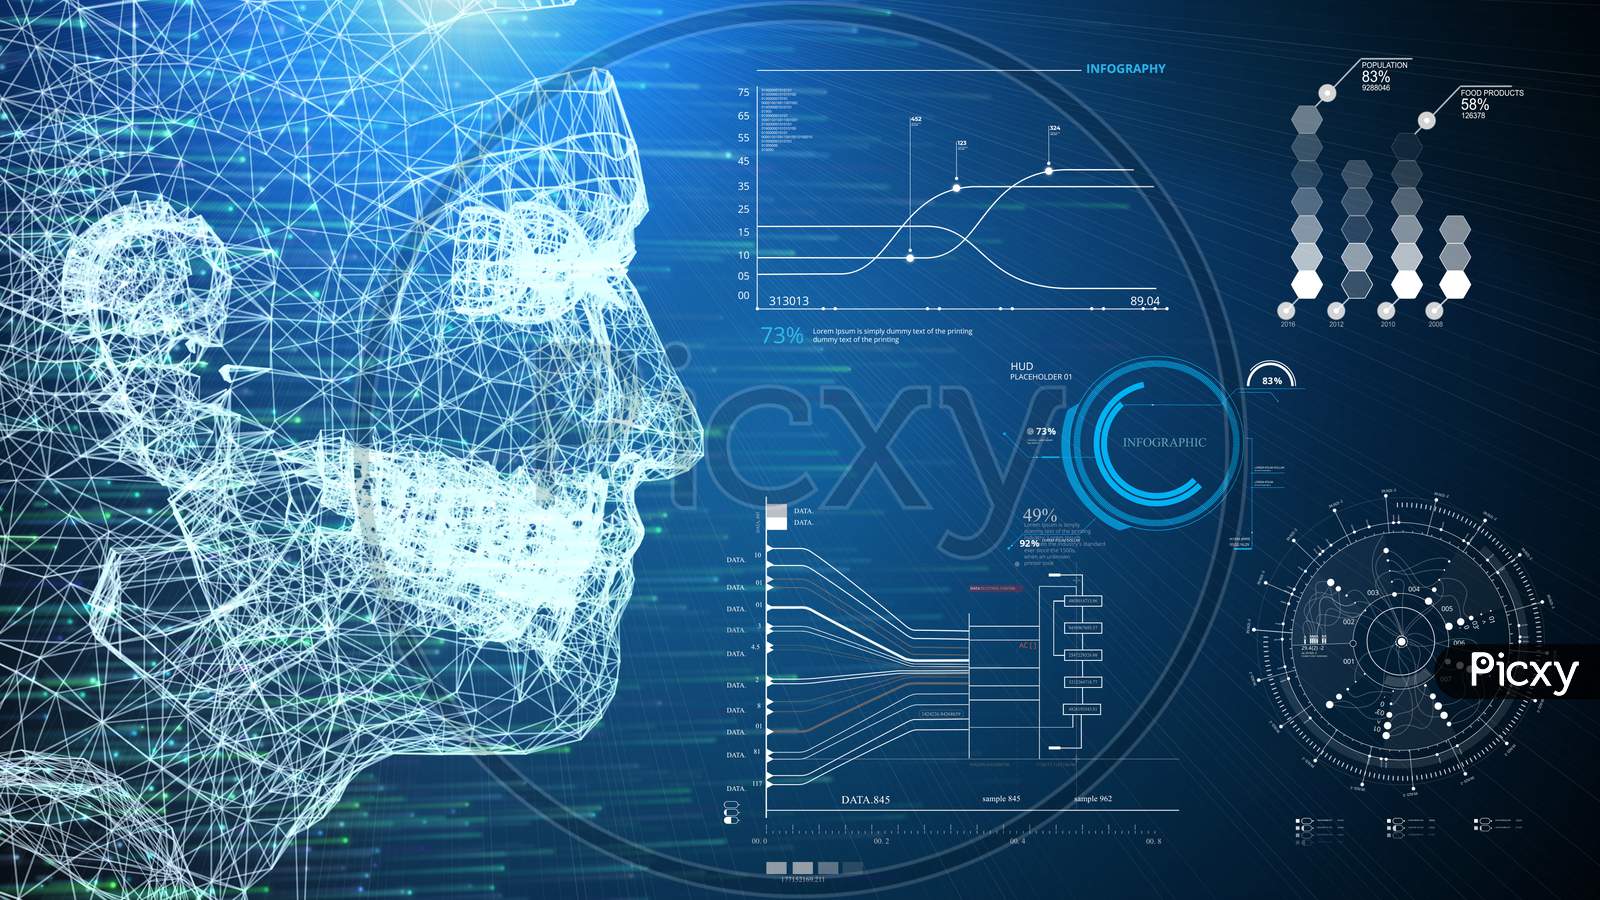 3D Illustration Wireframe Human Ai System And Infographic Information Scanner Hud Interface On Blue Background. Business Vr Technology And Medical. Digital Transformation Disruption Database Network